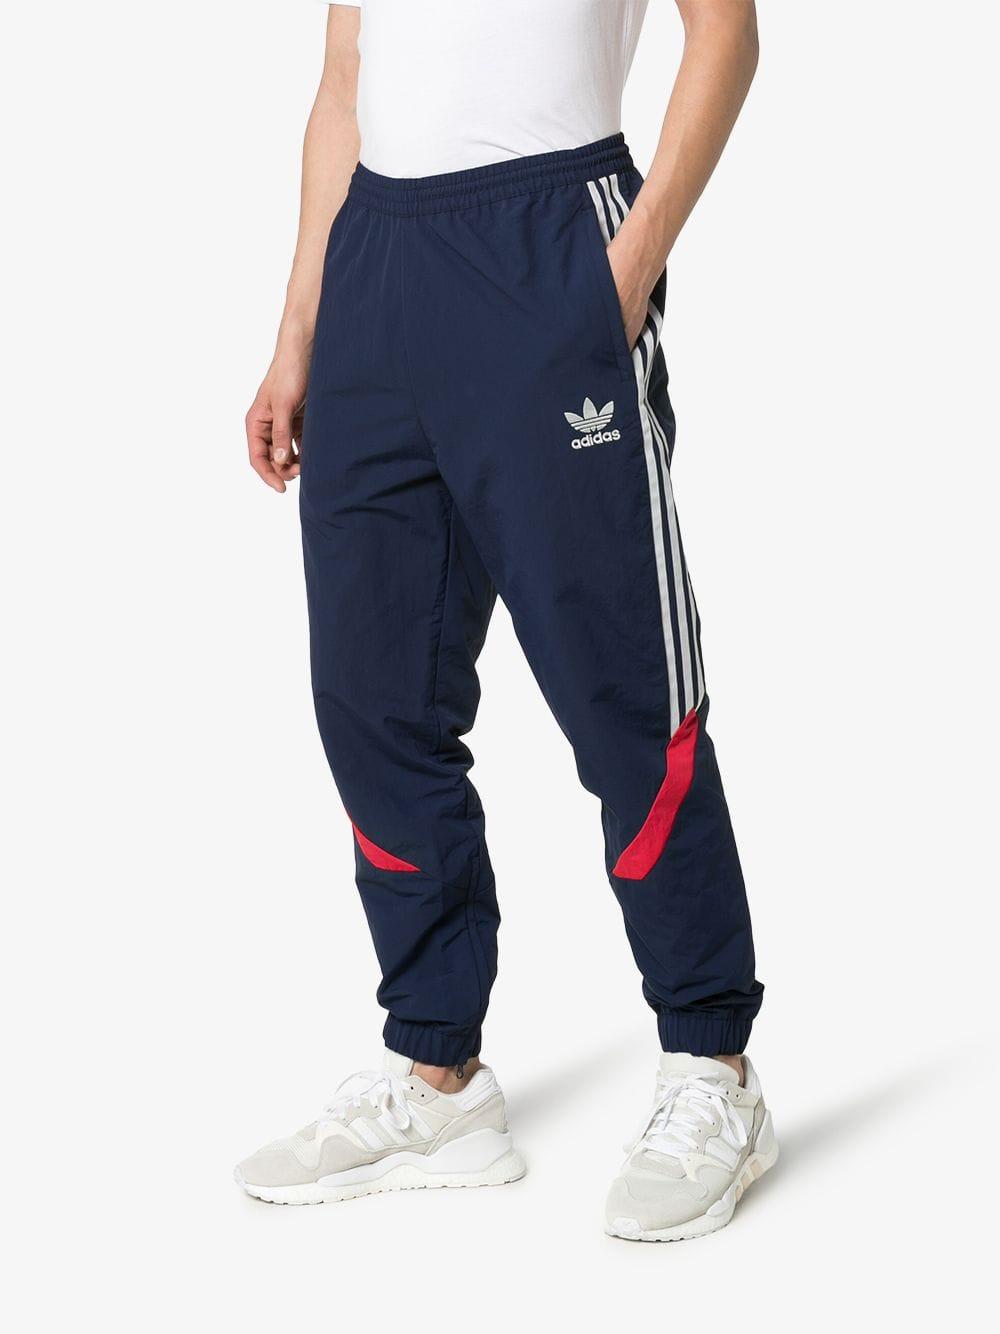 adidas track pants red stripes